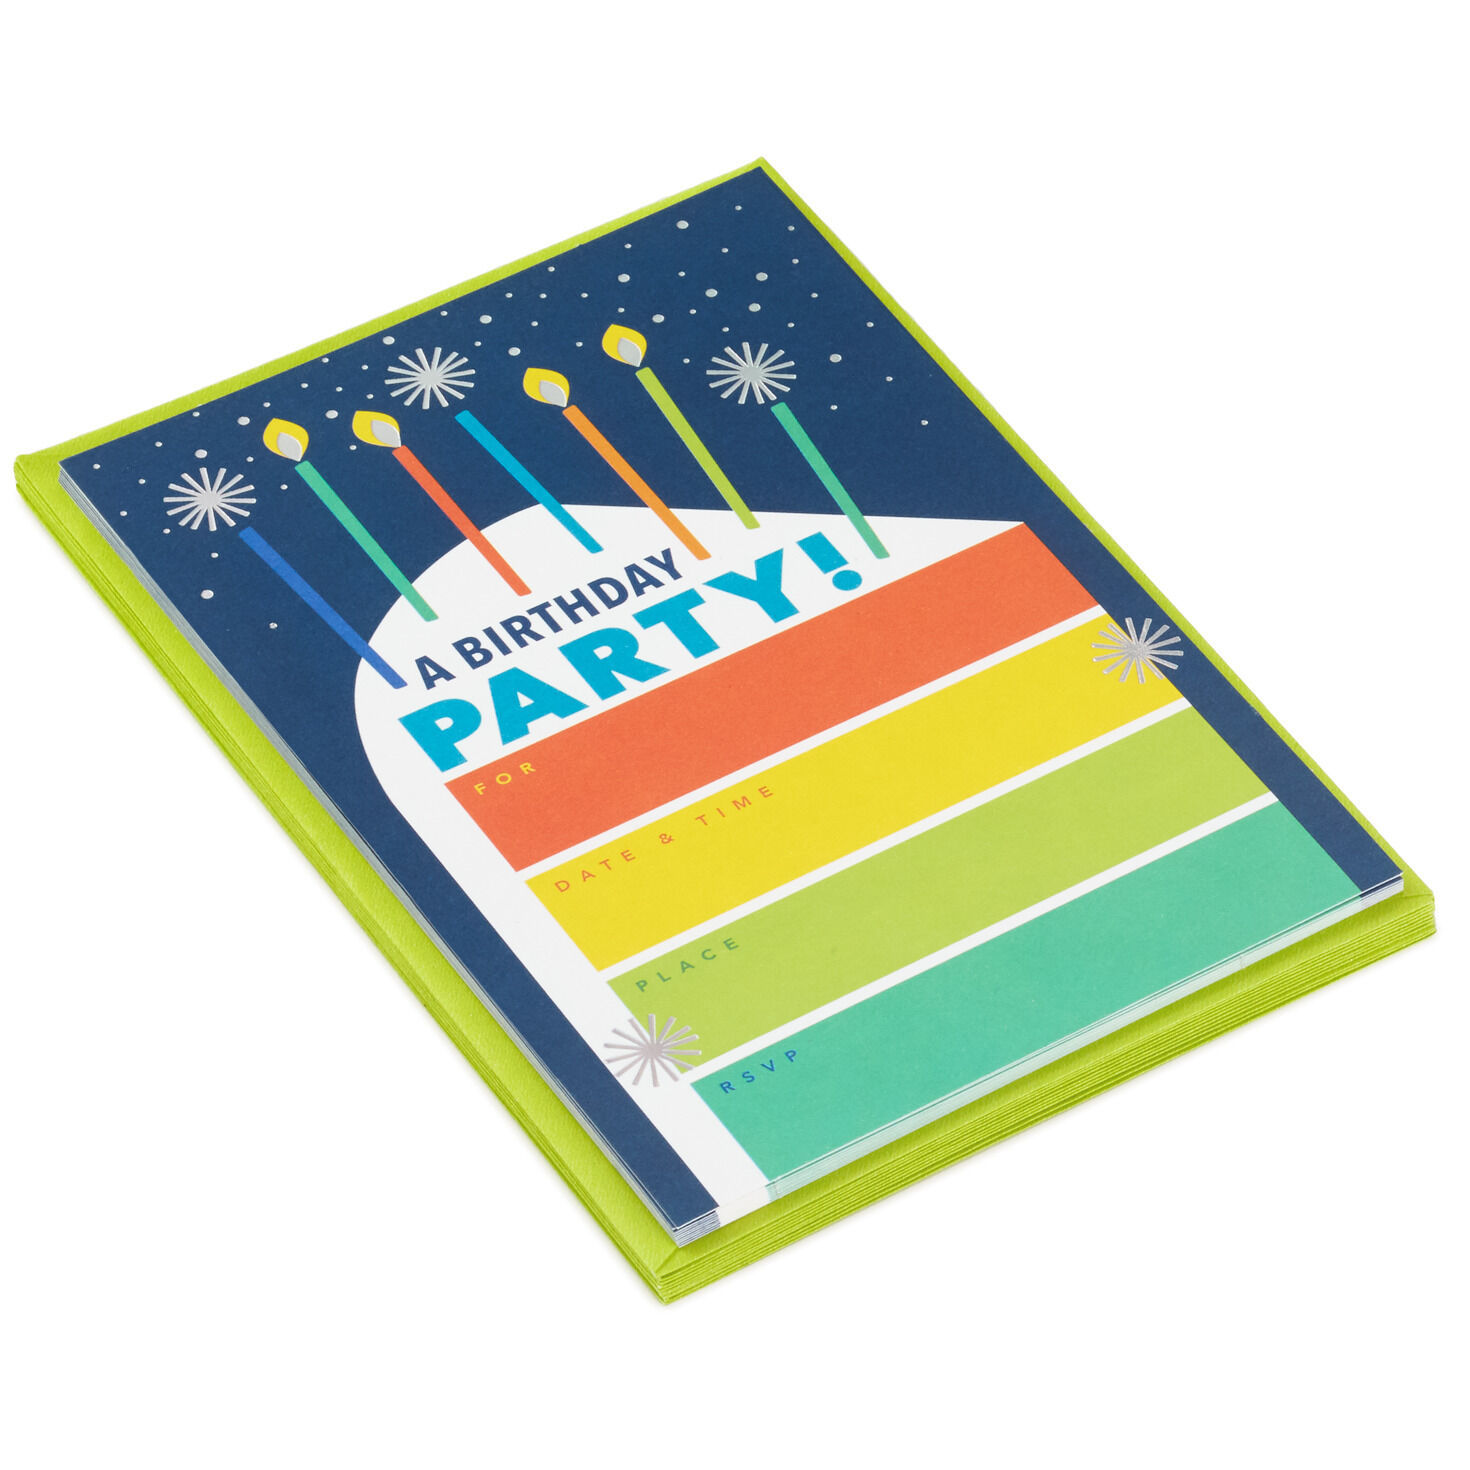 Slice of Cake Fill-in-the-Blank Birthday Party Invitations, Pack of 10 for only USD 5.99 | Hallmark